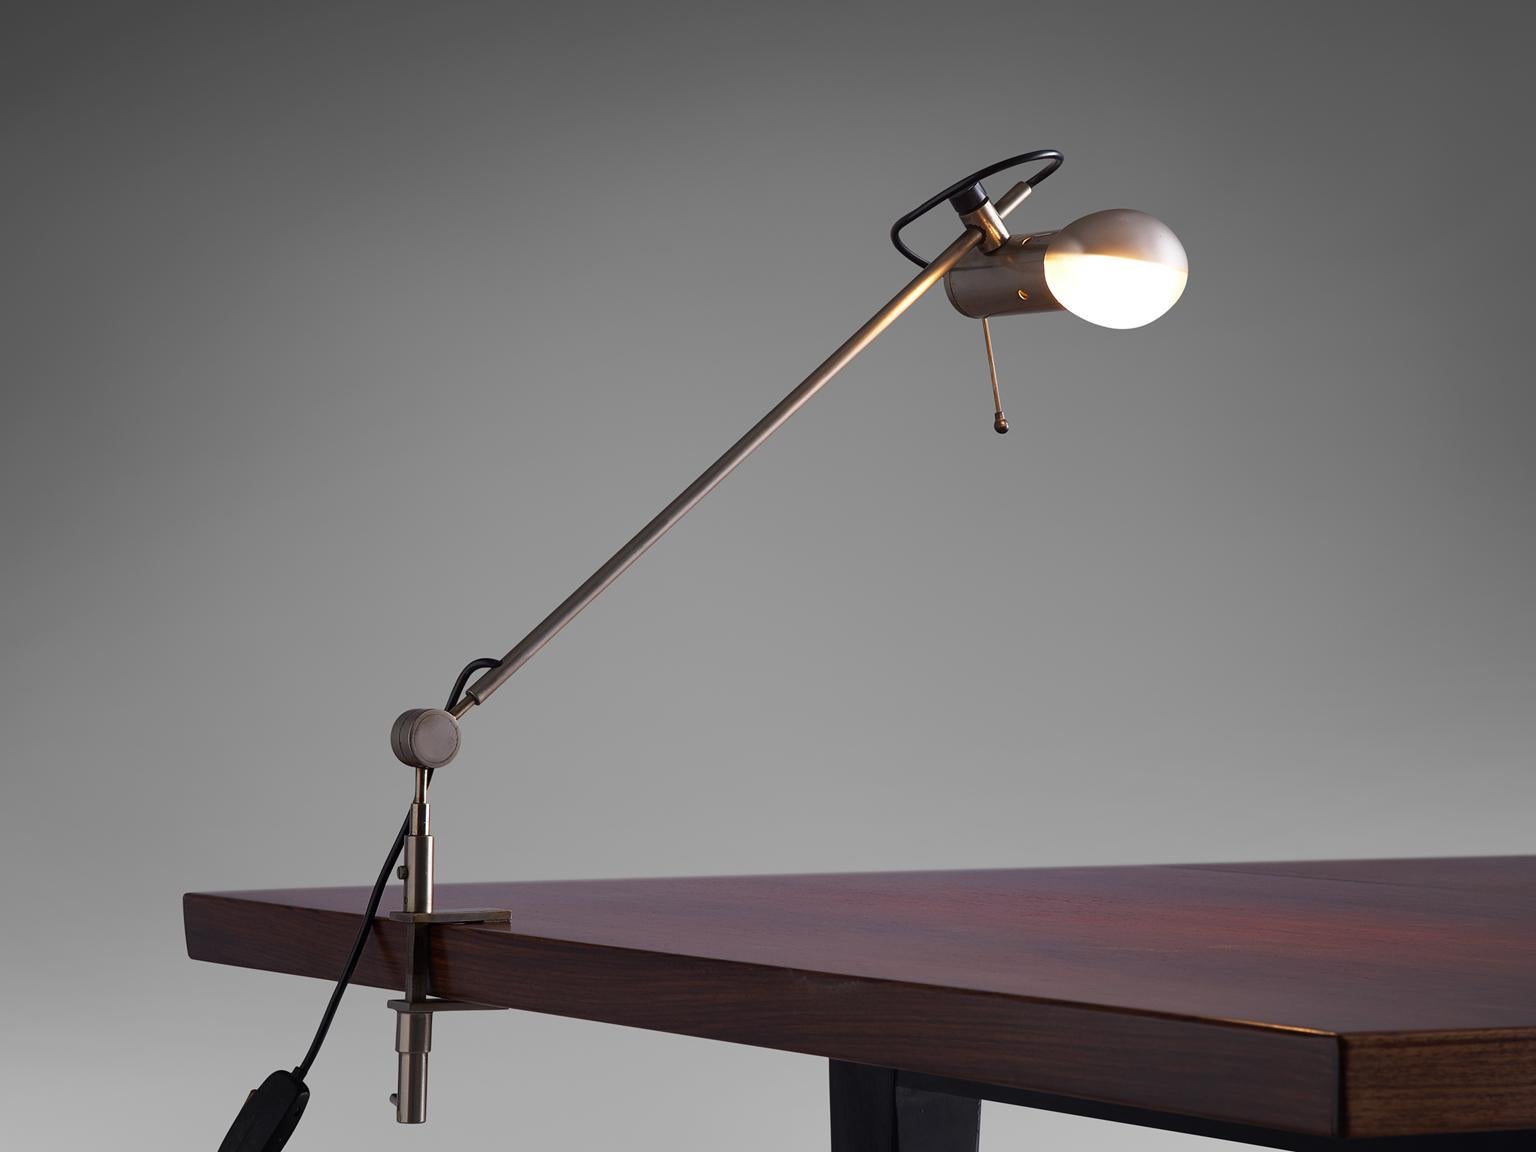 Tito Agnoli for O-Luce, desk light 'Cornalux', metal, Italy, 1964.

Modern table lamp designed by Tito Agnoli. The light bulb has a reflector inside.
A very versatile design thanks to the fixing system that can be secured to several tables, but